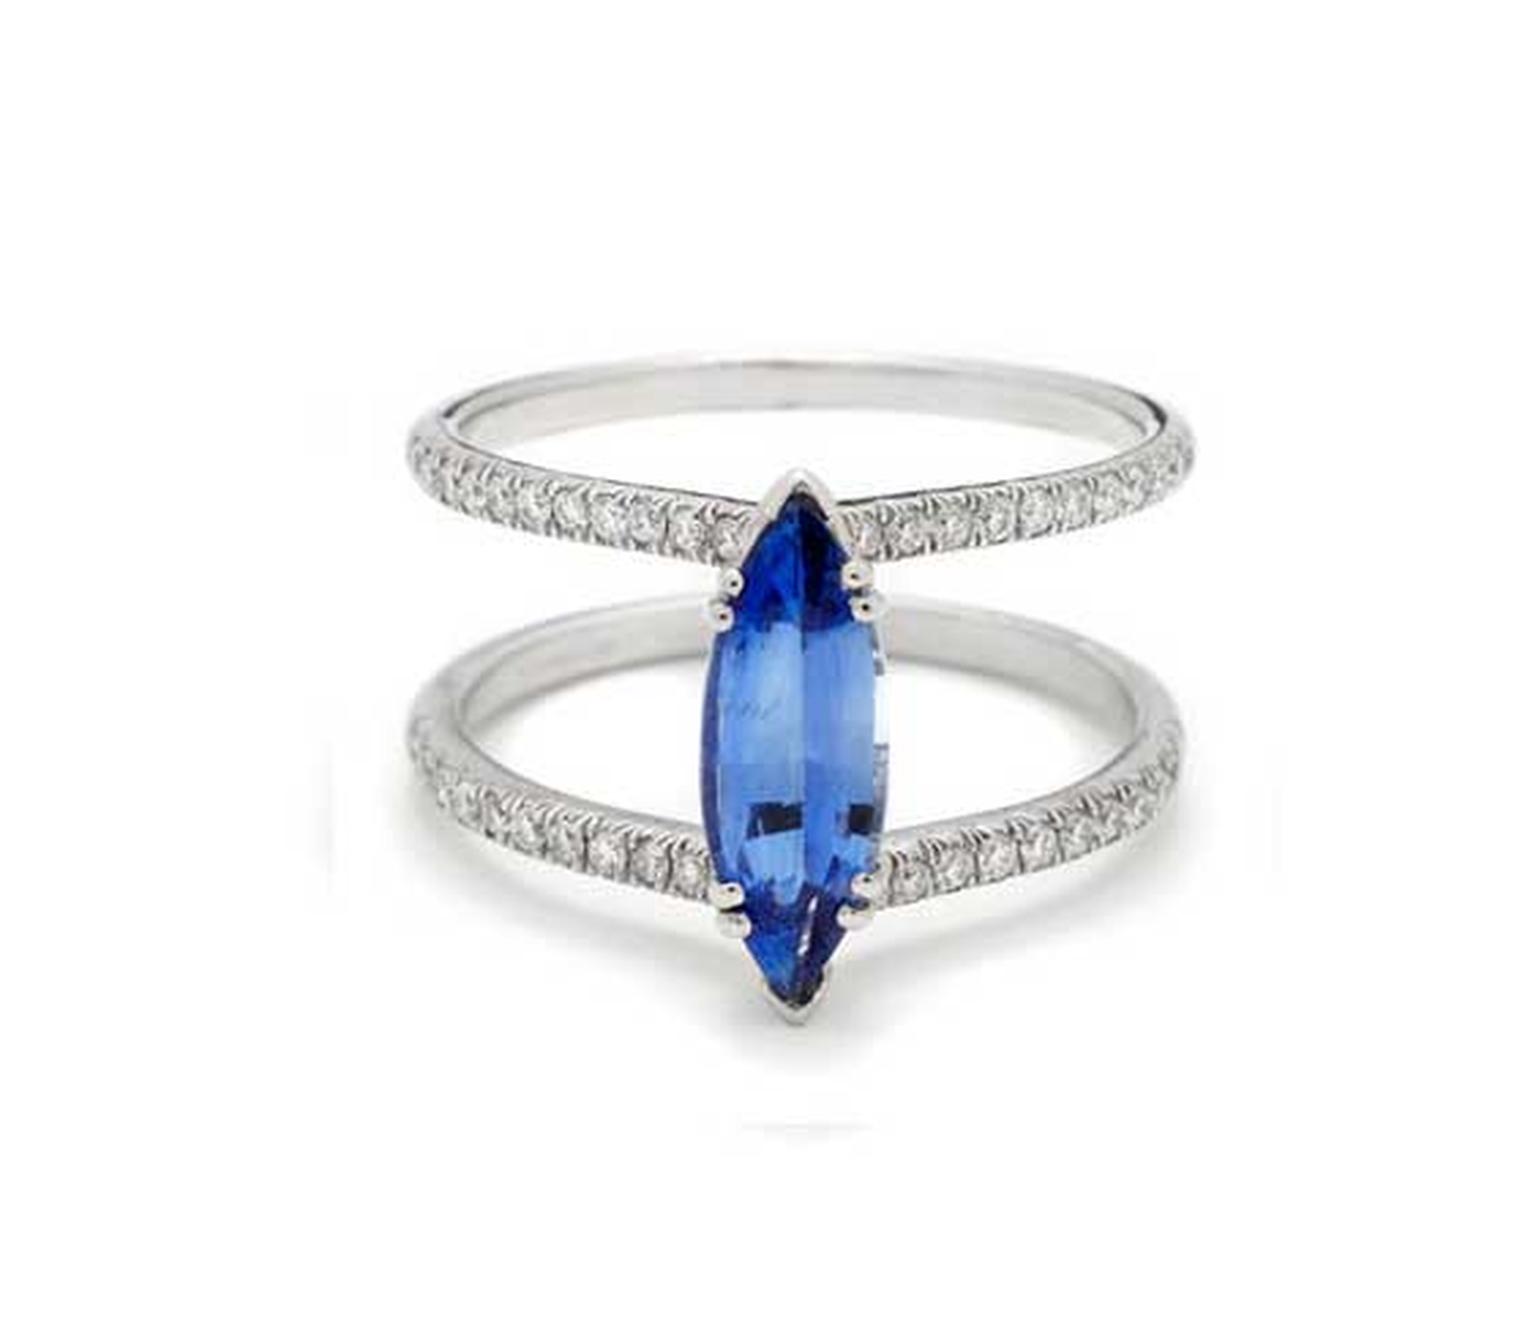 Anna Sheffield Attelage marquise-cut sapphire and diamond ring in white gold, which is designed so that you can wear your wedding band and eternity ring in-between the diamond-set bands (US$9,200).